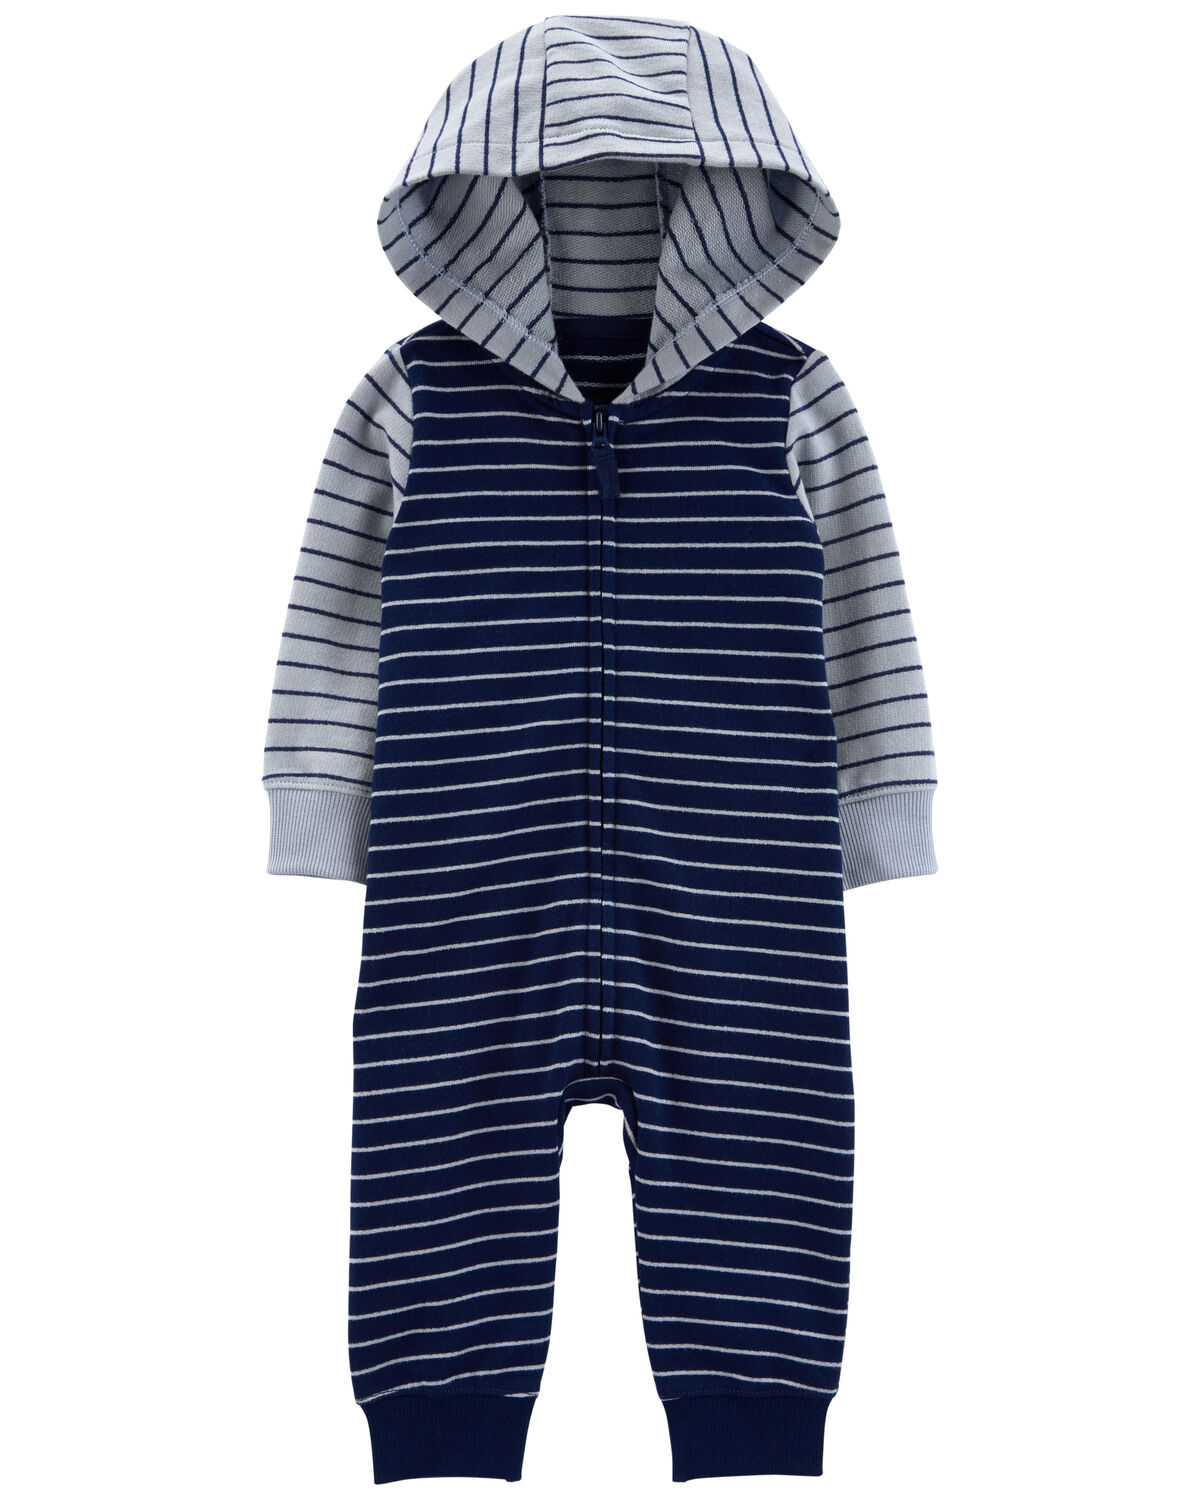 Baby Hooded Bear Jumpsuit